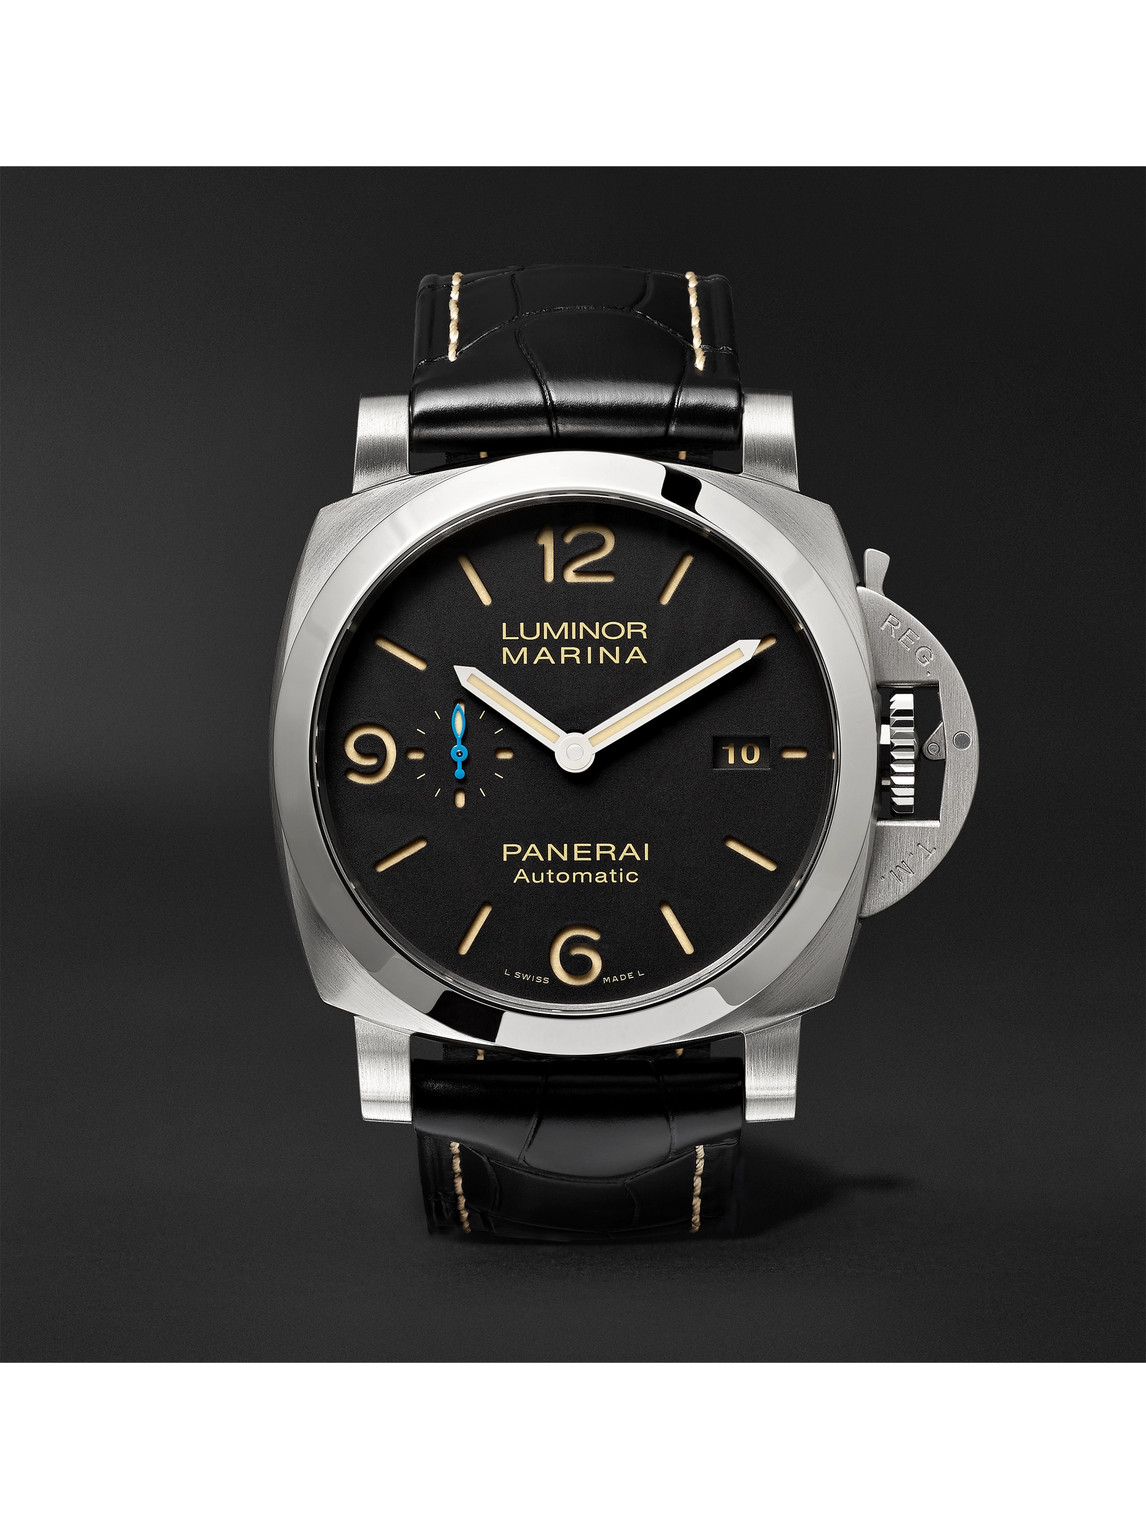 Luminor Marina Automatic 1950 3 Days Acciaio Automatic 44mm Stainless Steel and Alligator Watch, Ref. No. PAM01312